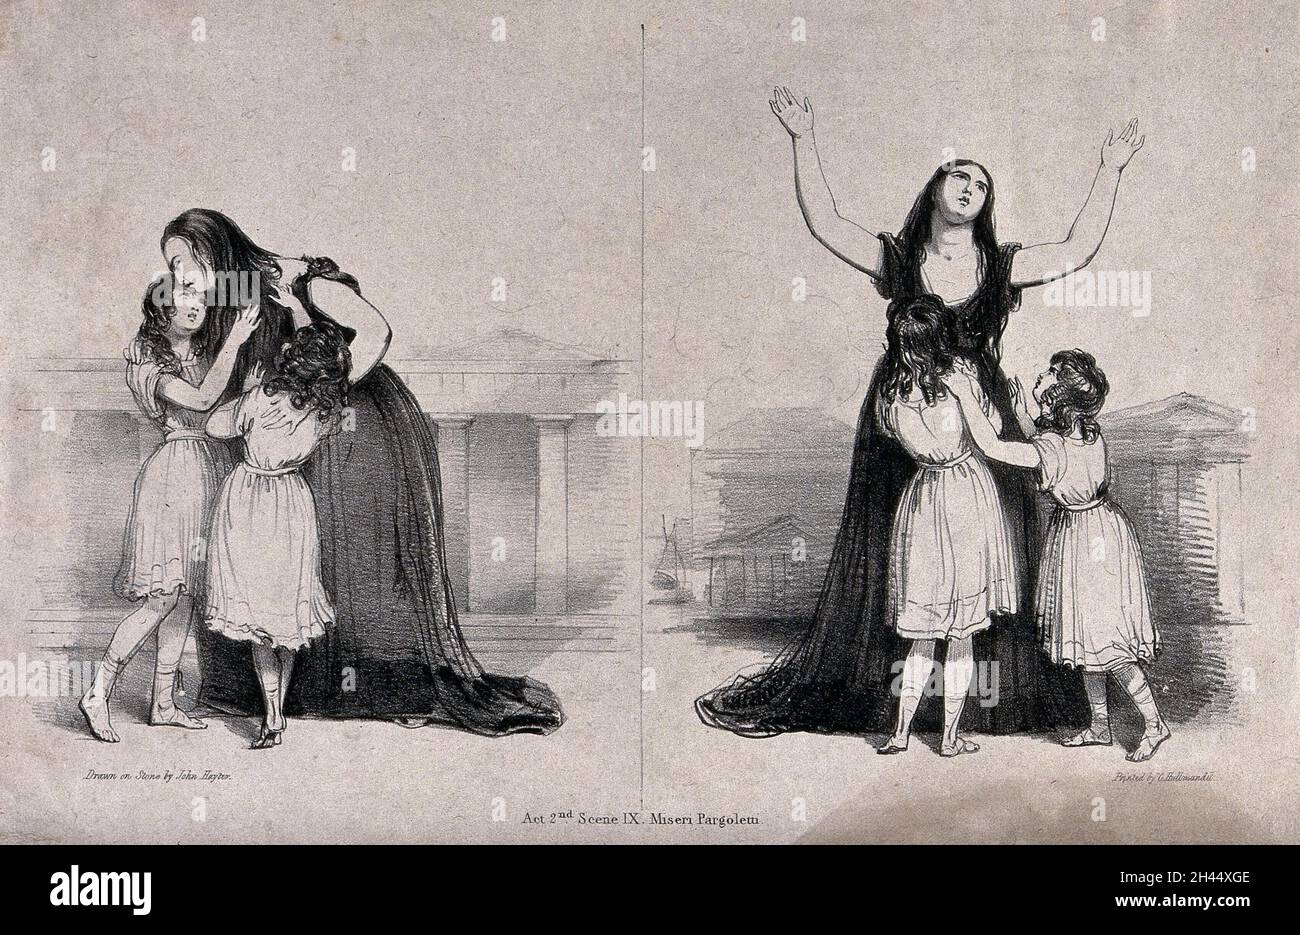 Giuditta Pasta in the role of Medea: she embraces her children (left) and then throws her arms up in anticipation of murdering them (right). Lithograph by John Hayter, 1827. Stock Photo